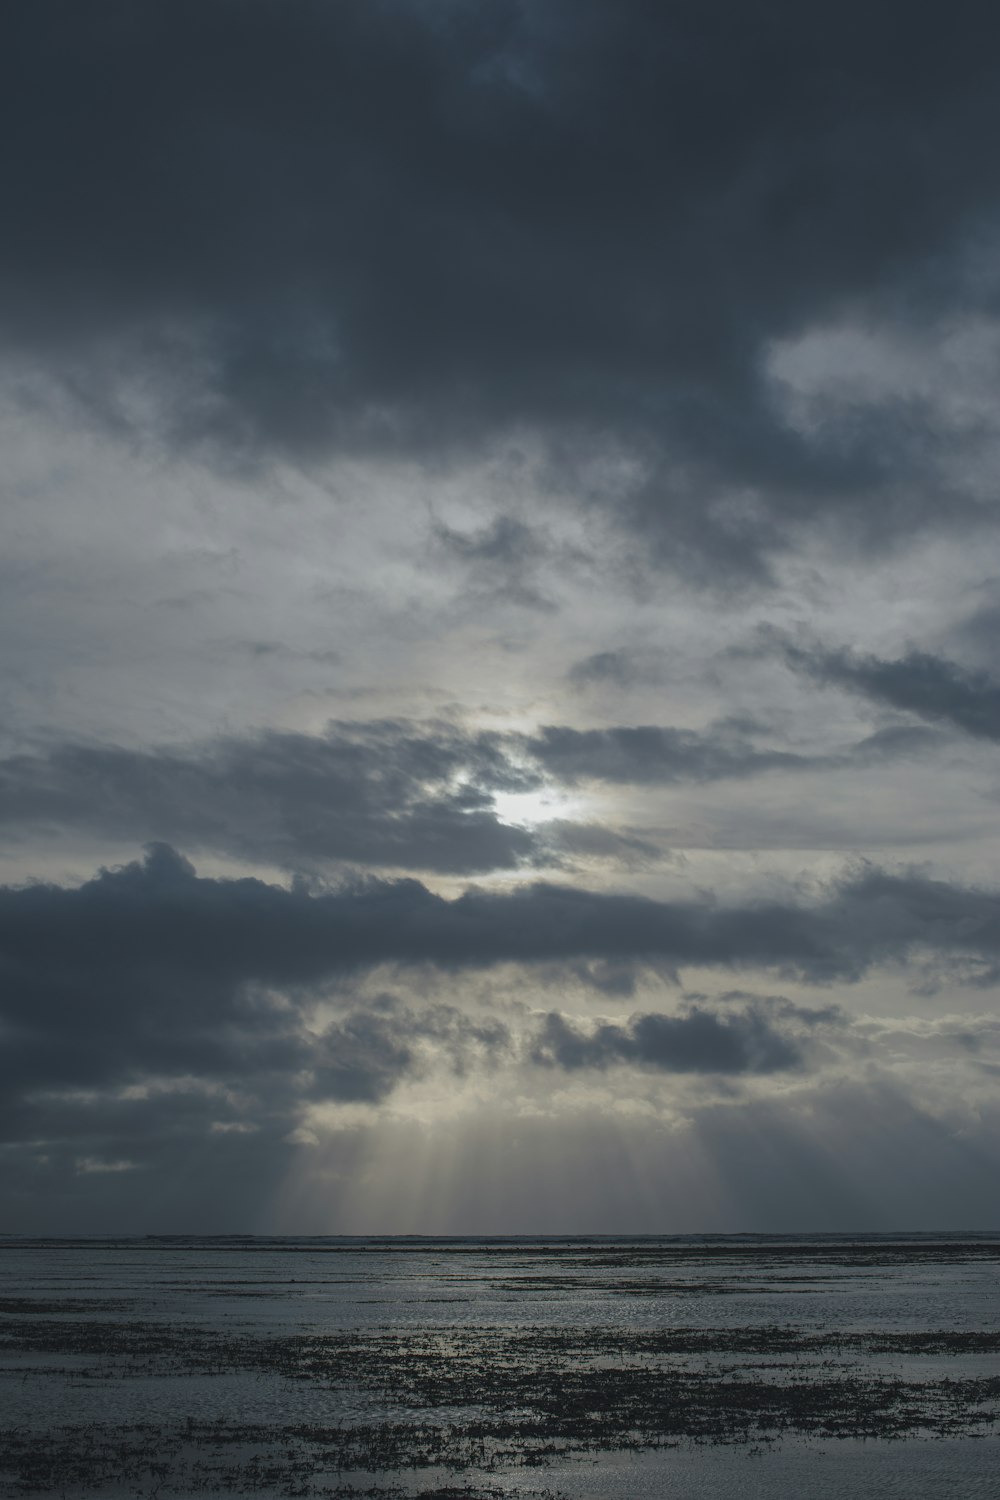 the sun is shining through the clouds over the ocean